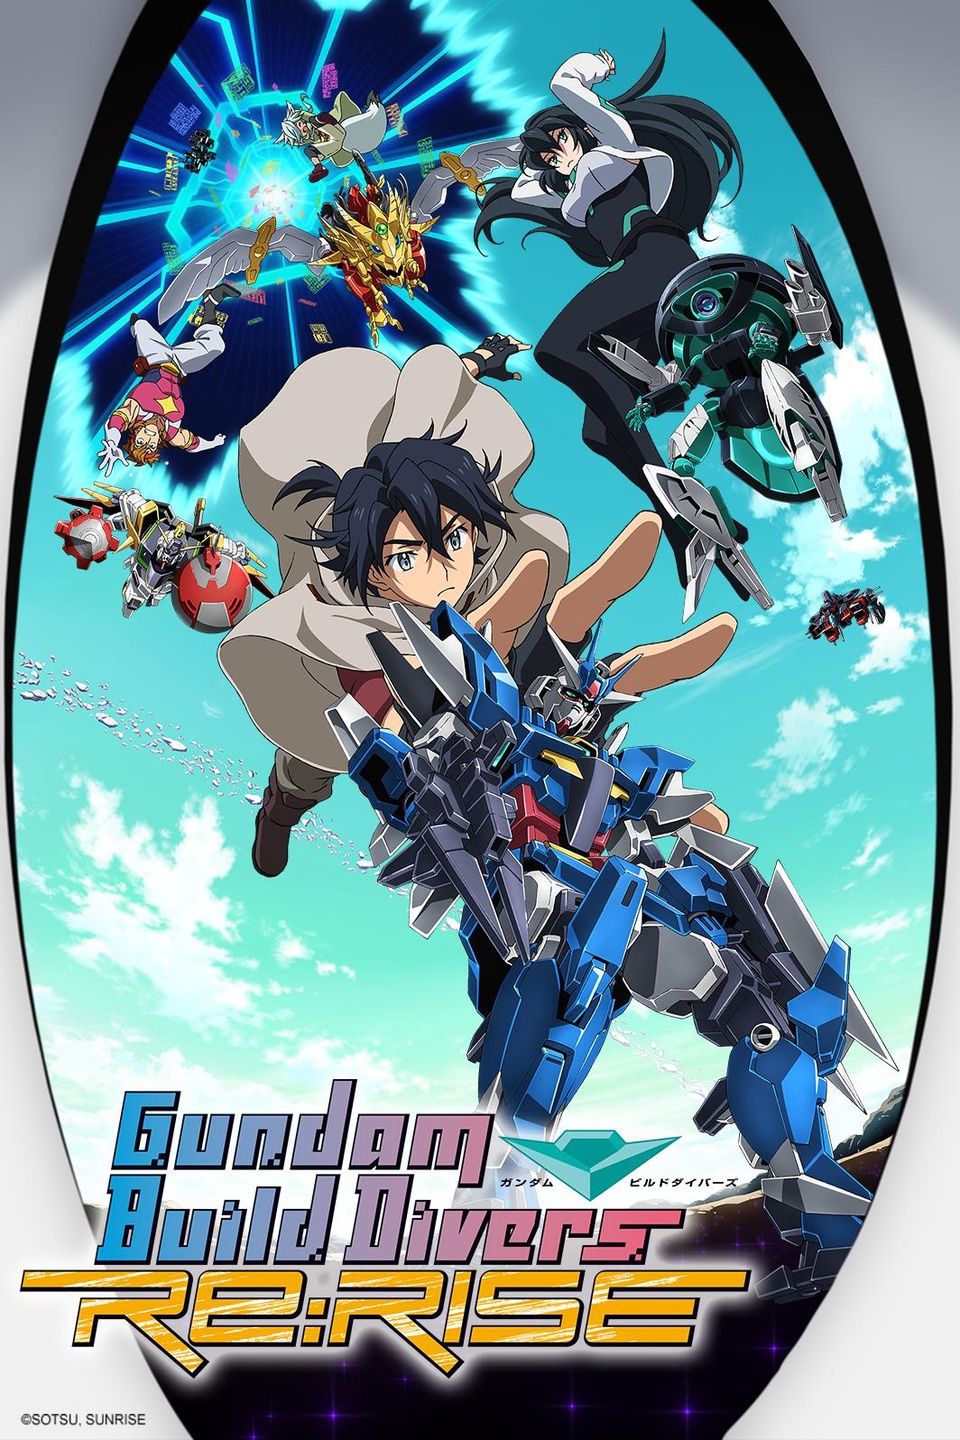 Characters falling from the sky in Mobile Suit Gundam Build Divers Re:Rise